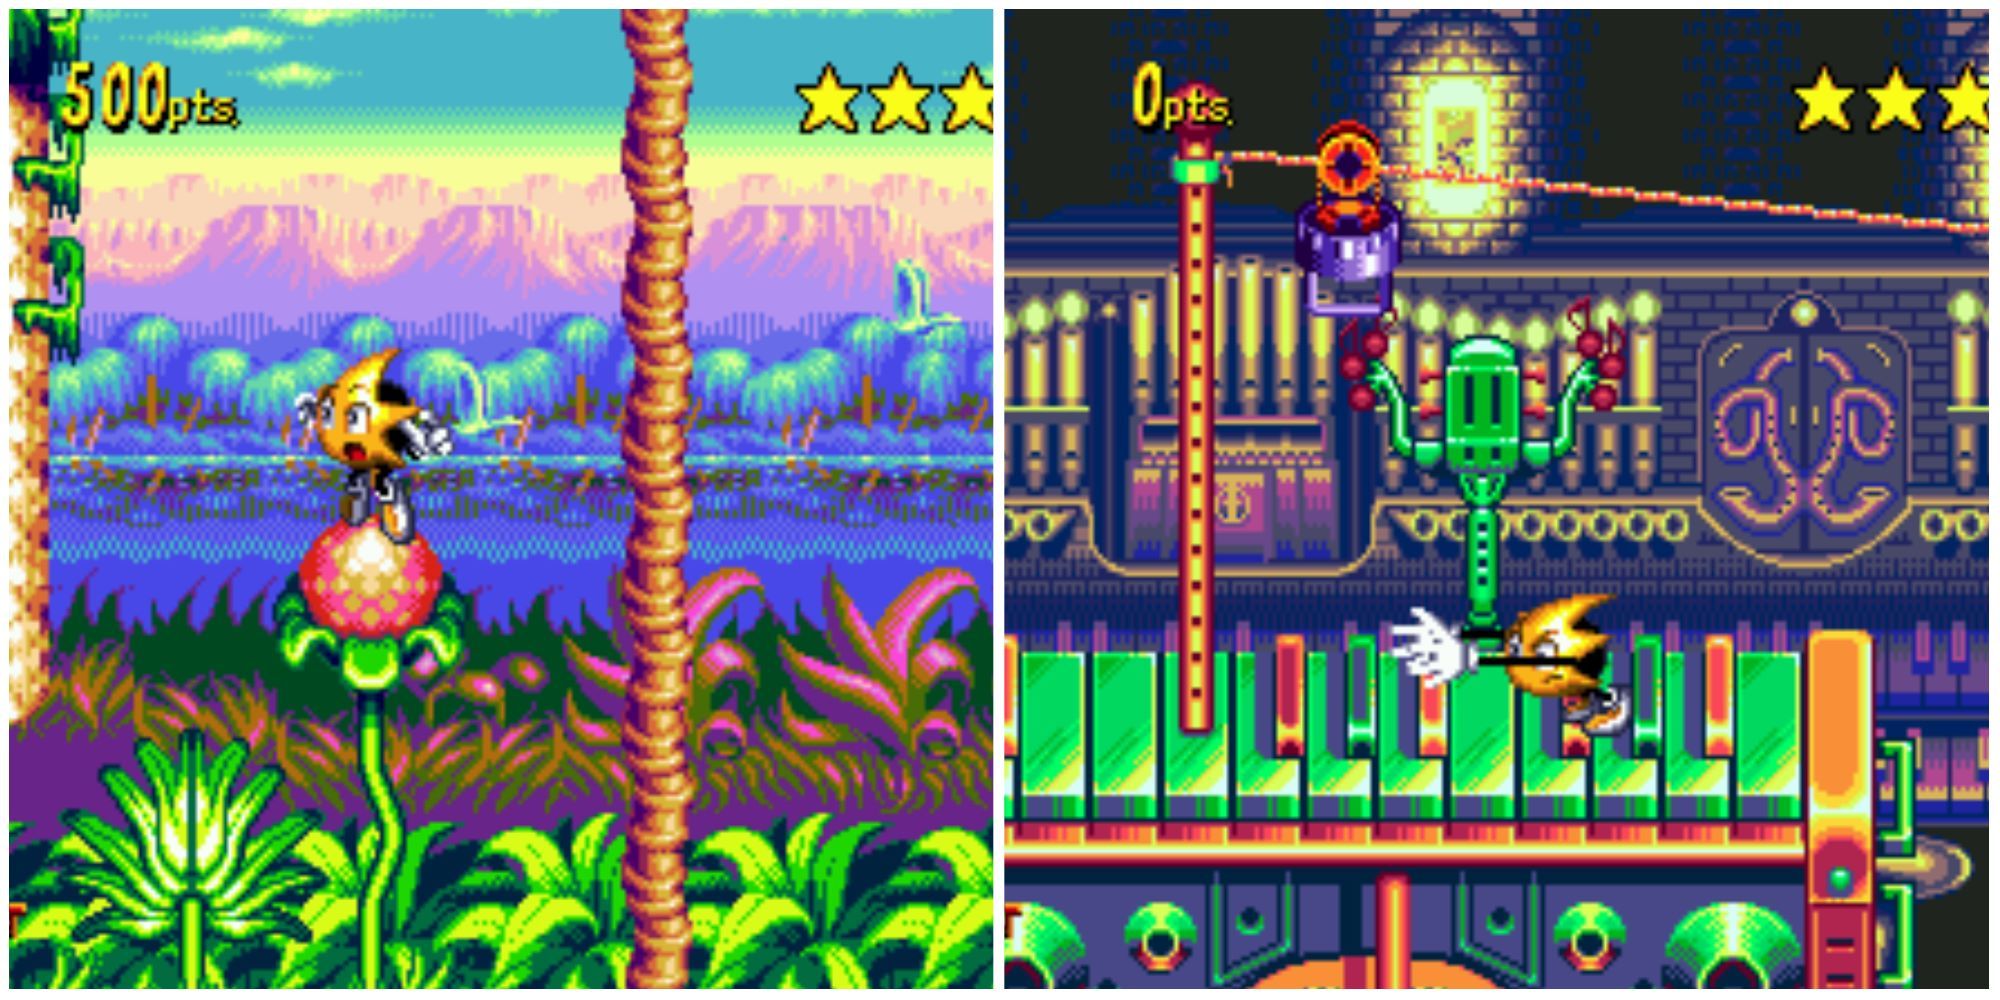 Left - Ristar jumping on a flower in a forest, Right - Ristar stretching his arms on top of a giant piano 